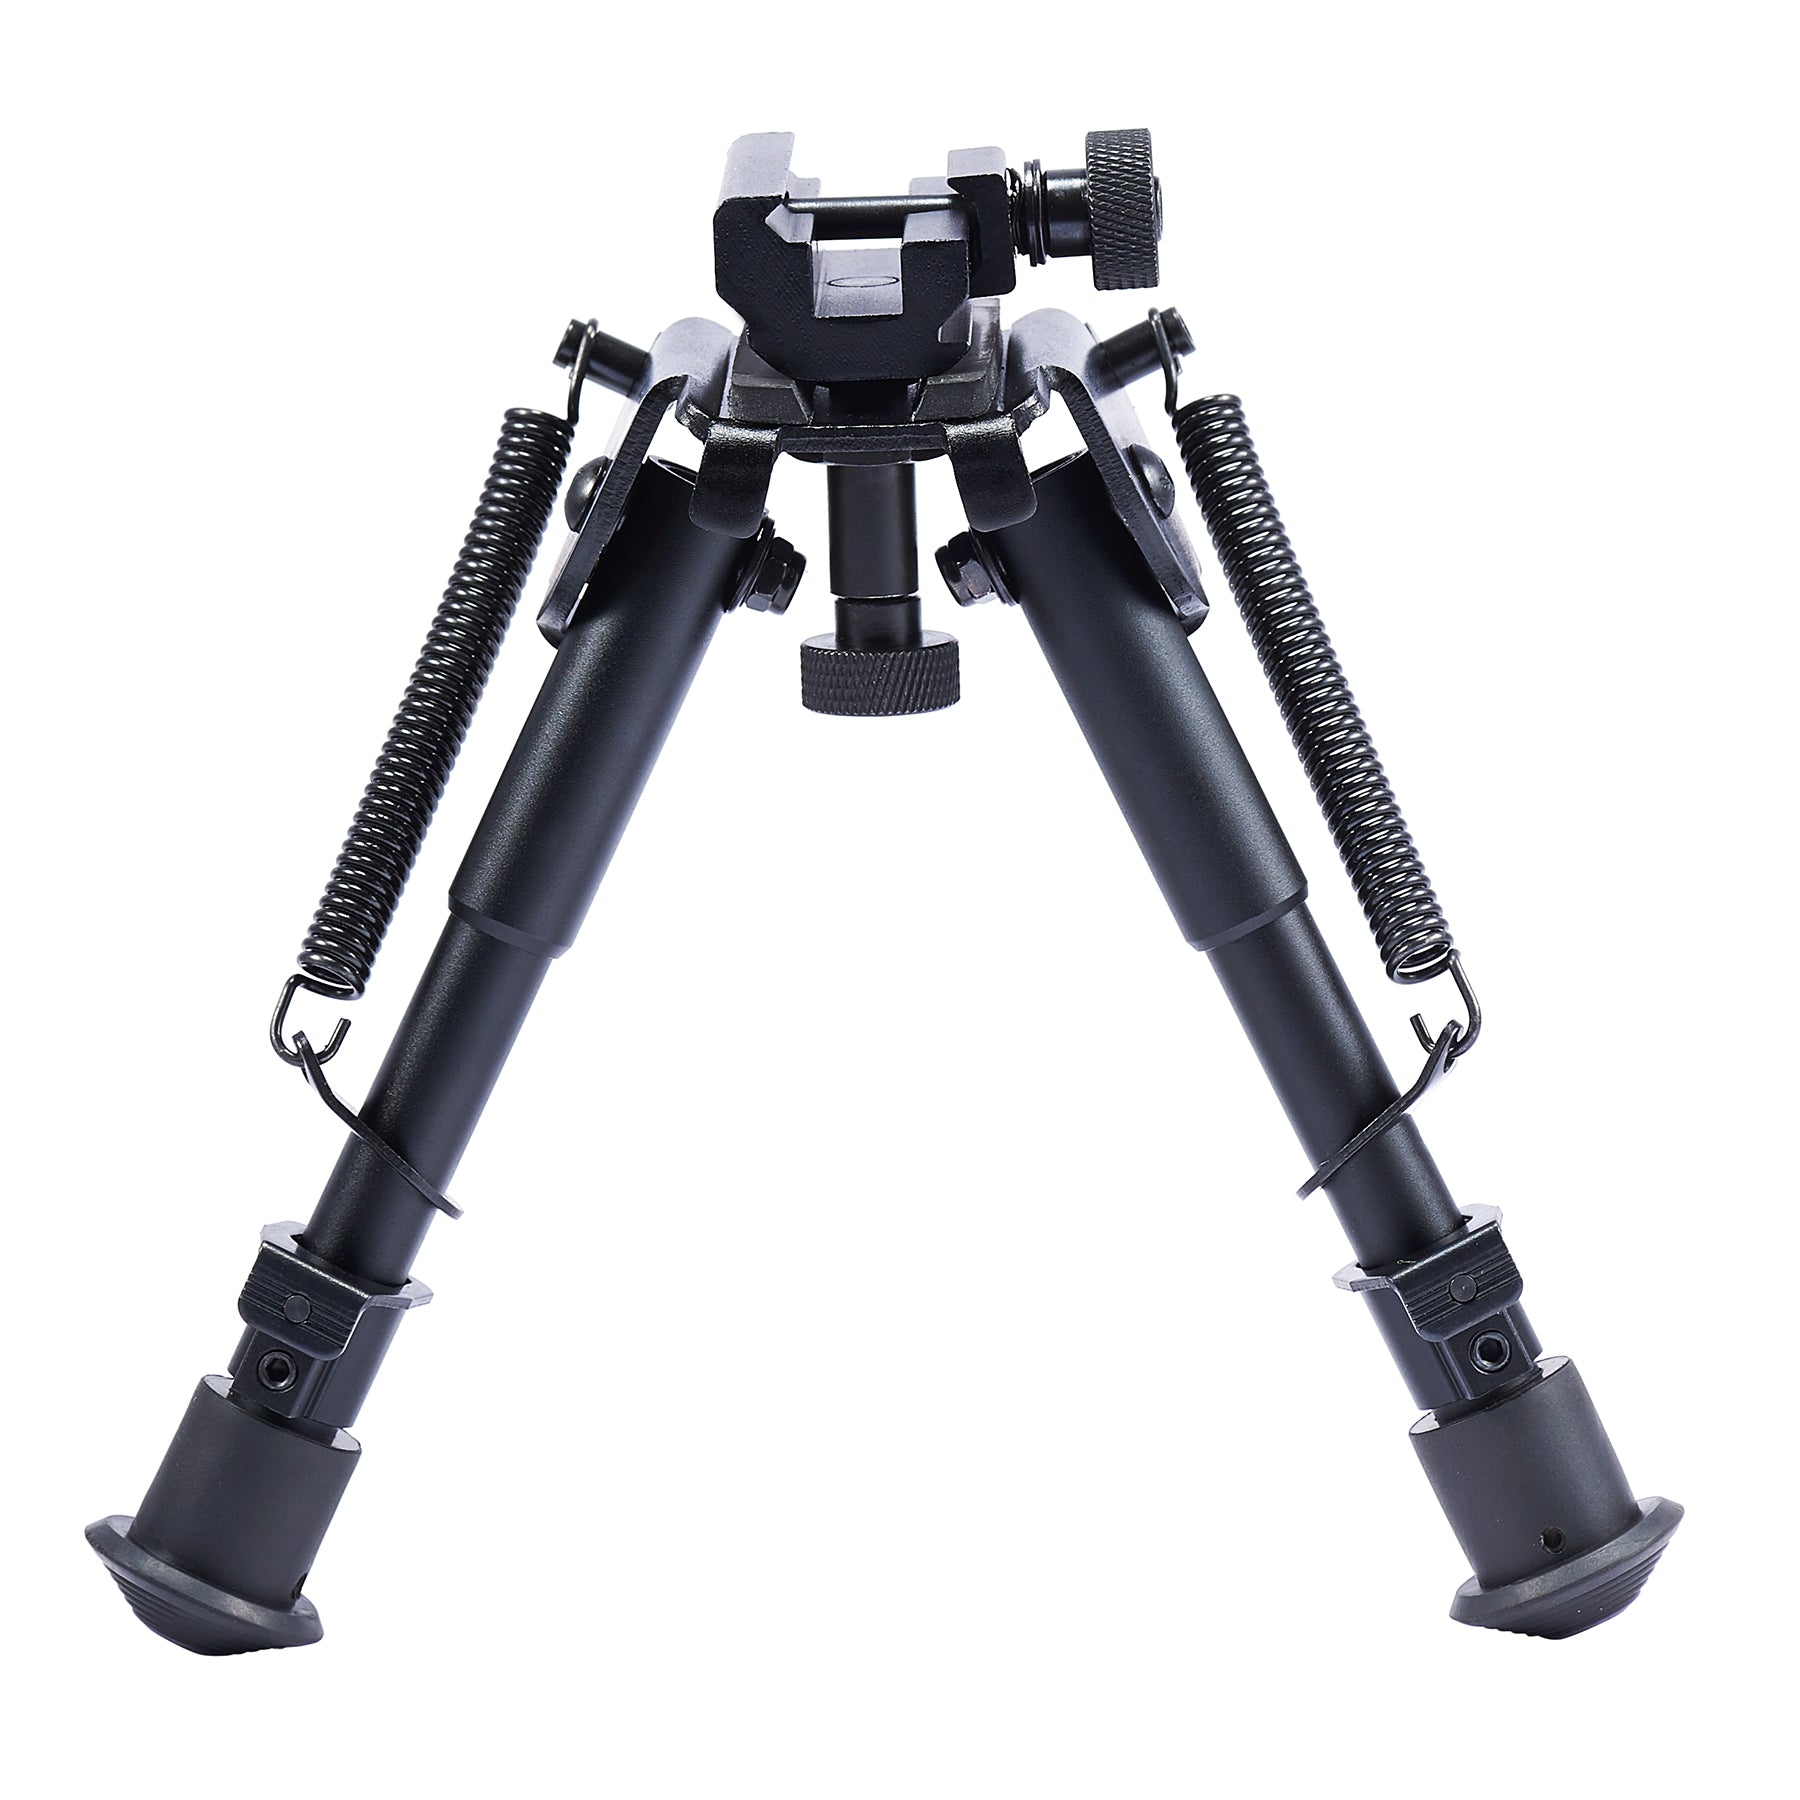 Tactical Rifle Bipod with Legs Adjustable 6-9" and 360 Degree Swivel Adapter